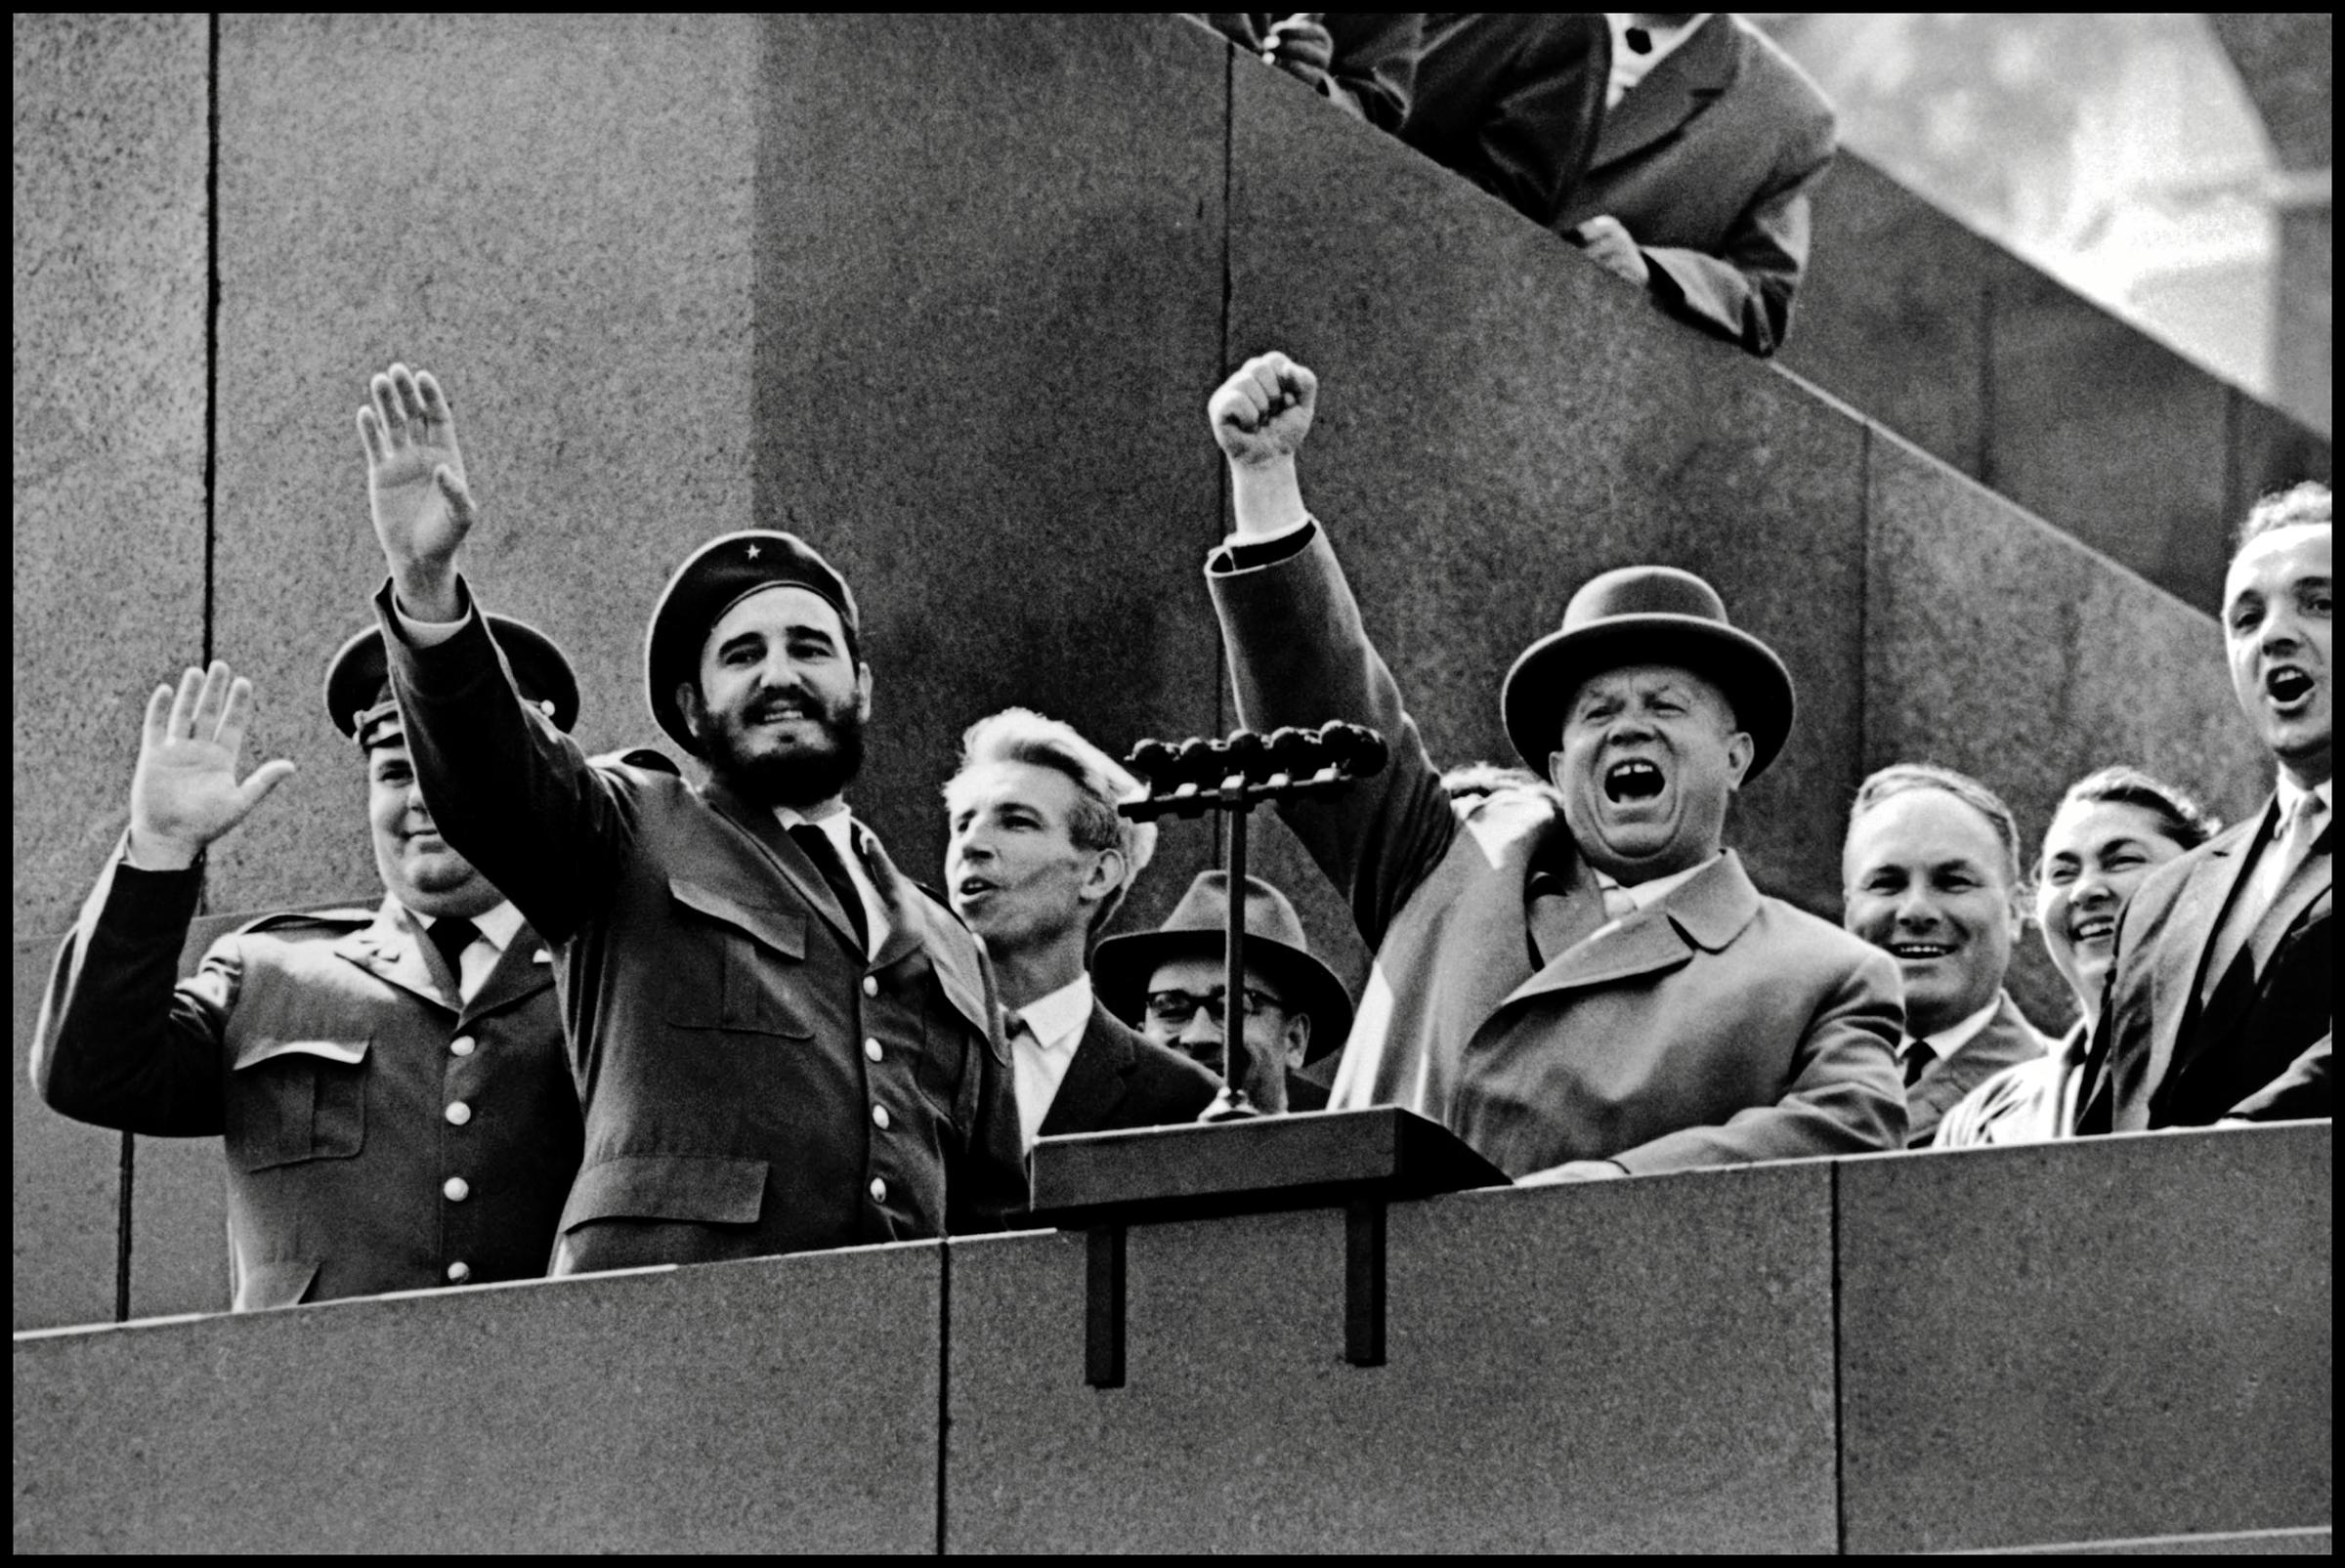 At the height of the Soviet-Cuban cooperation, Nikita Khrushchev welcomes Cuban President Fidel Castro at the podium of the Kremlin in front of the Red Square in Moscow, 1961.